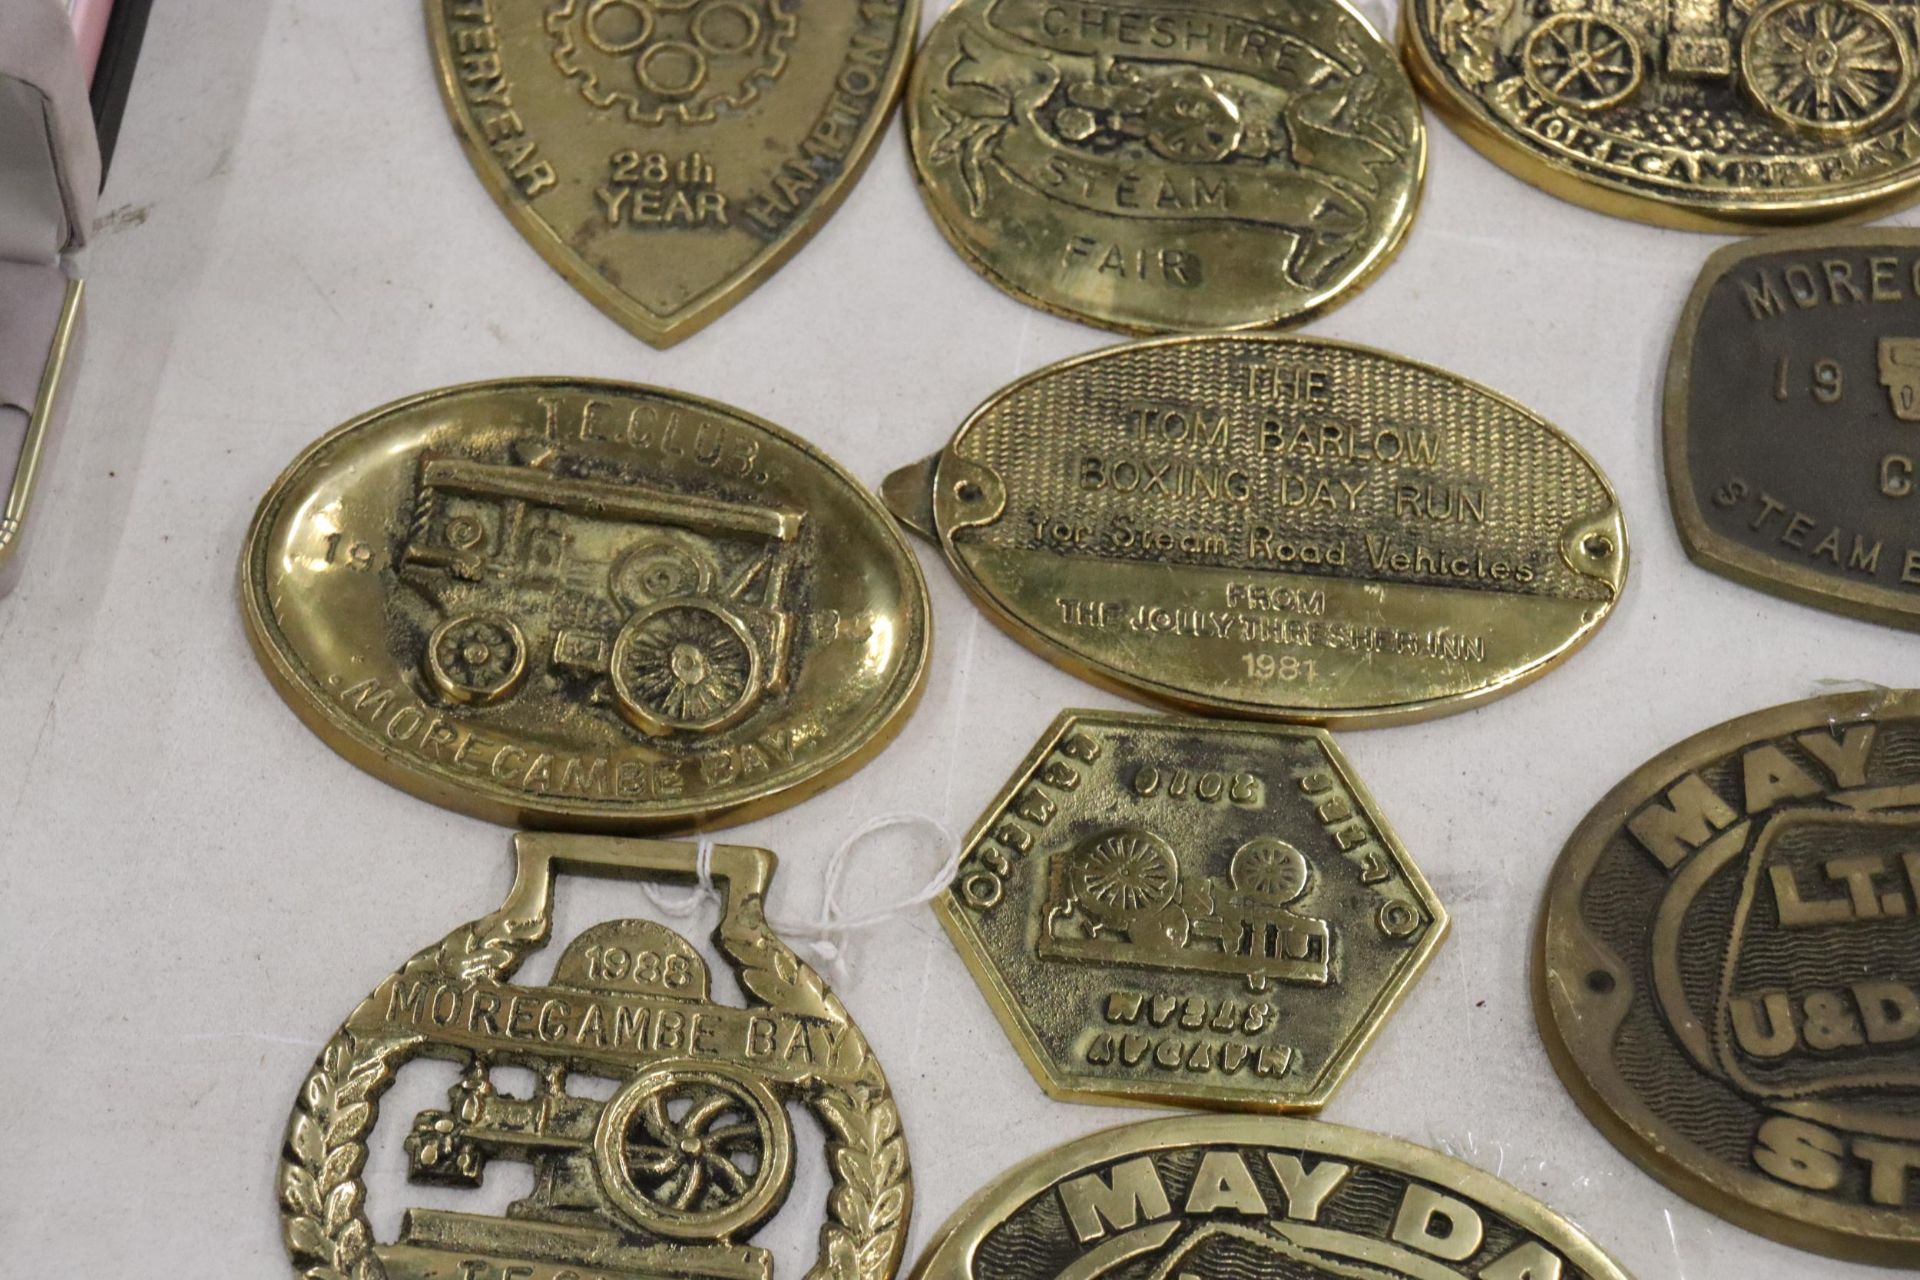 A LARGE COLLECTION OF BRASS STEAM RALLY PLAQUES - 20 IN TOTAL - Image 6 of 10